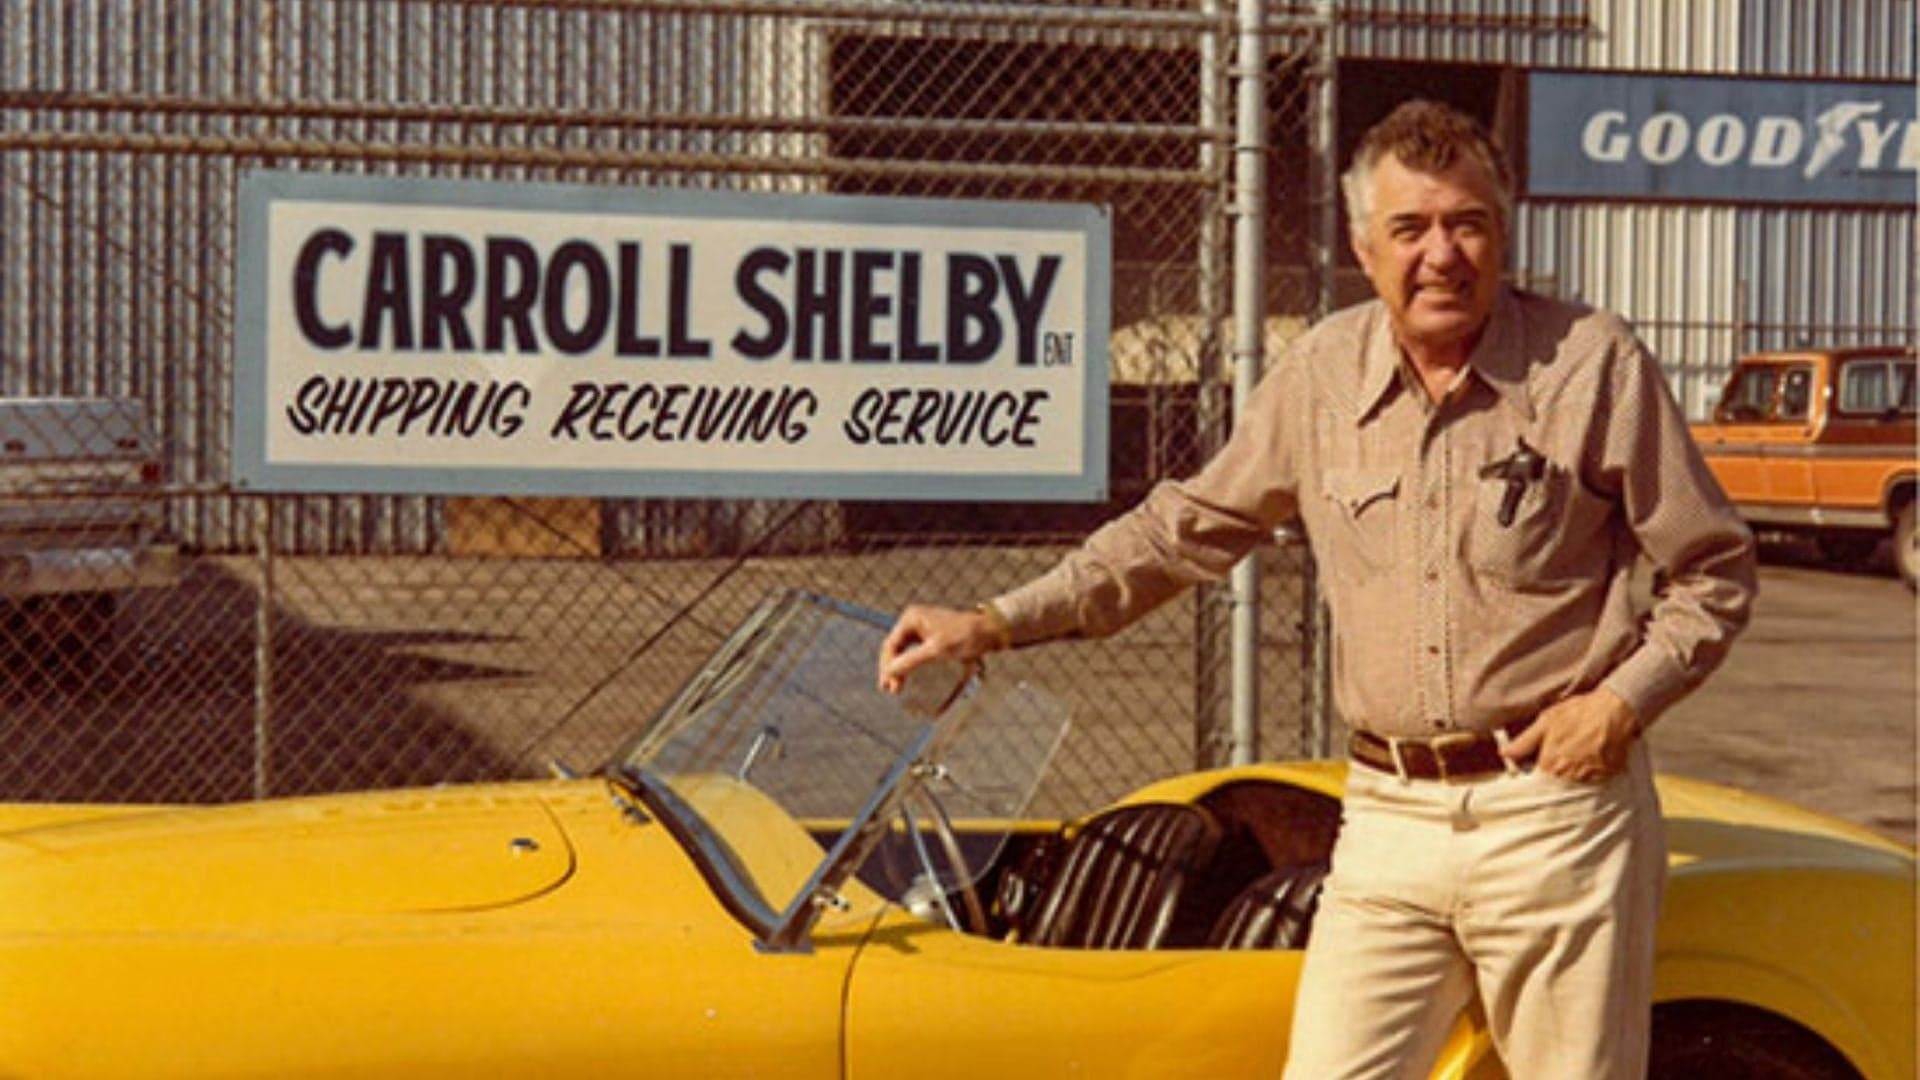 ‘He Was Just Grandpa to Us’: Carroll Shelby’s Grandson Aaron on Growing Up with a Legend